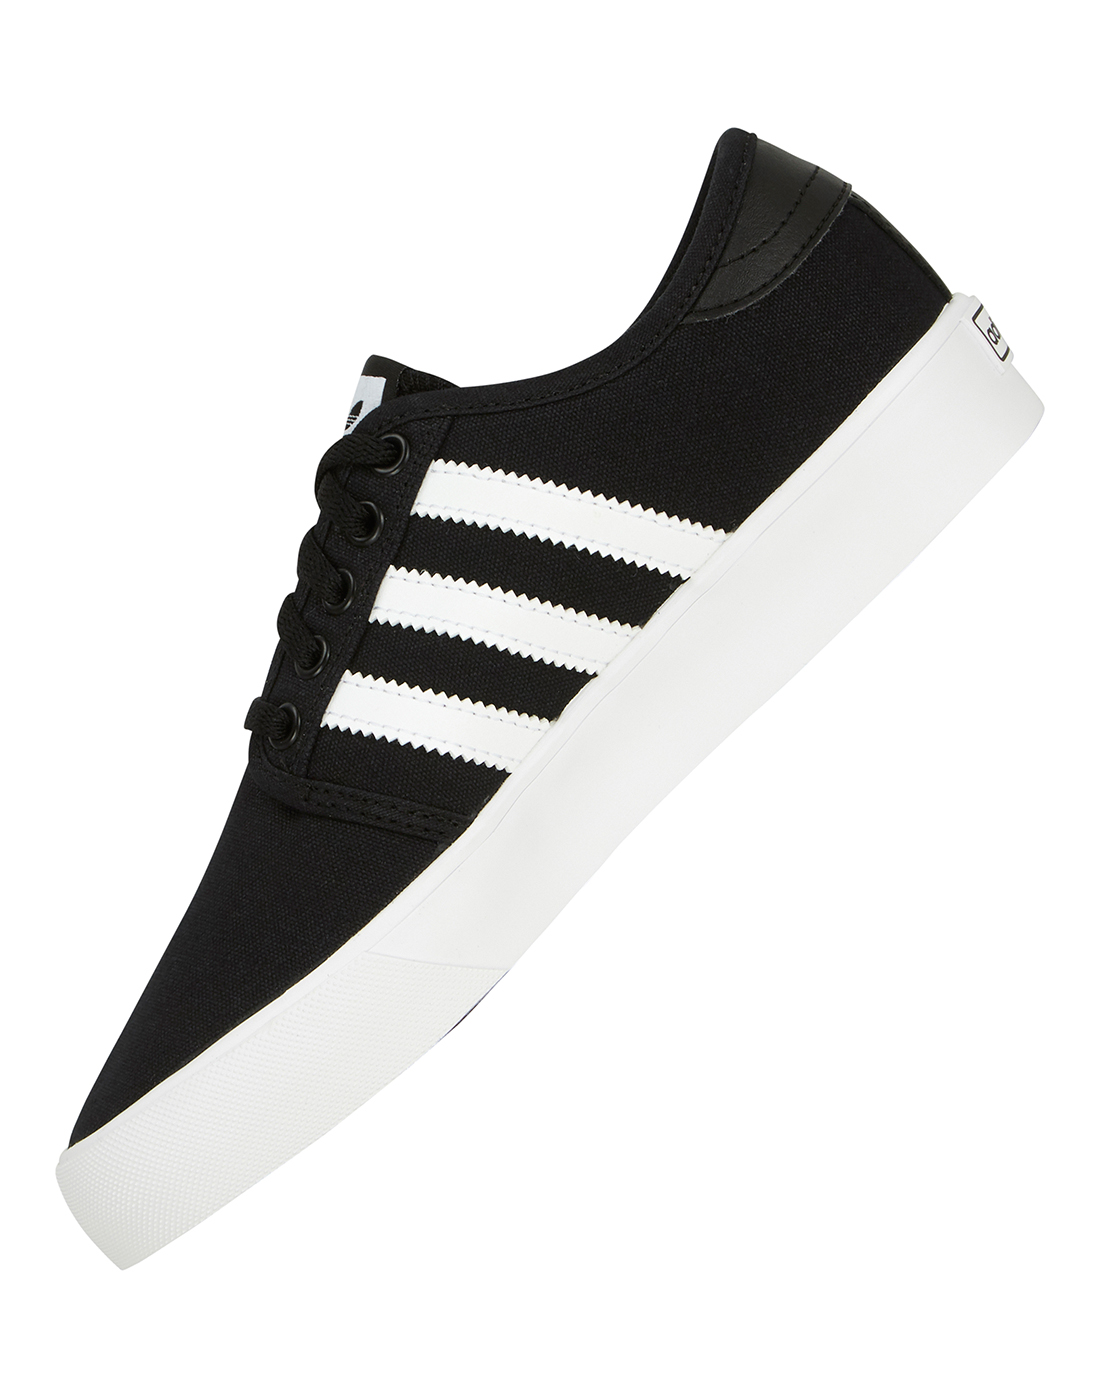 Boy's Black adidas Originals Seeley Trainers | Life Style Sports